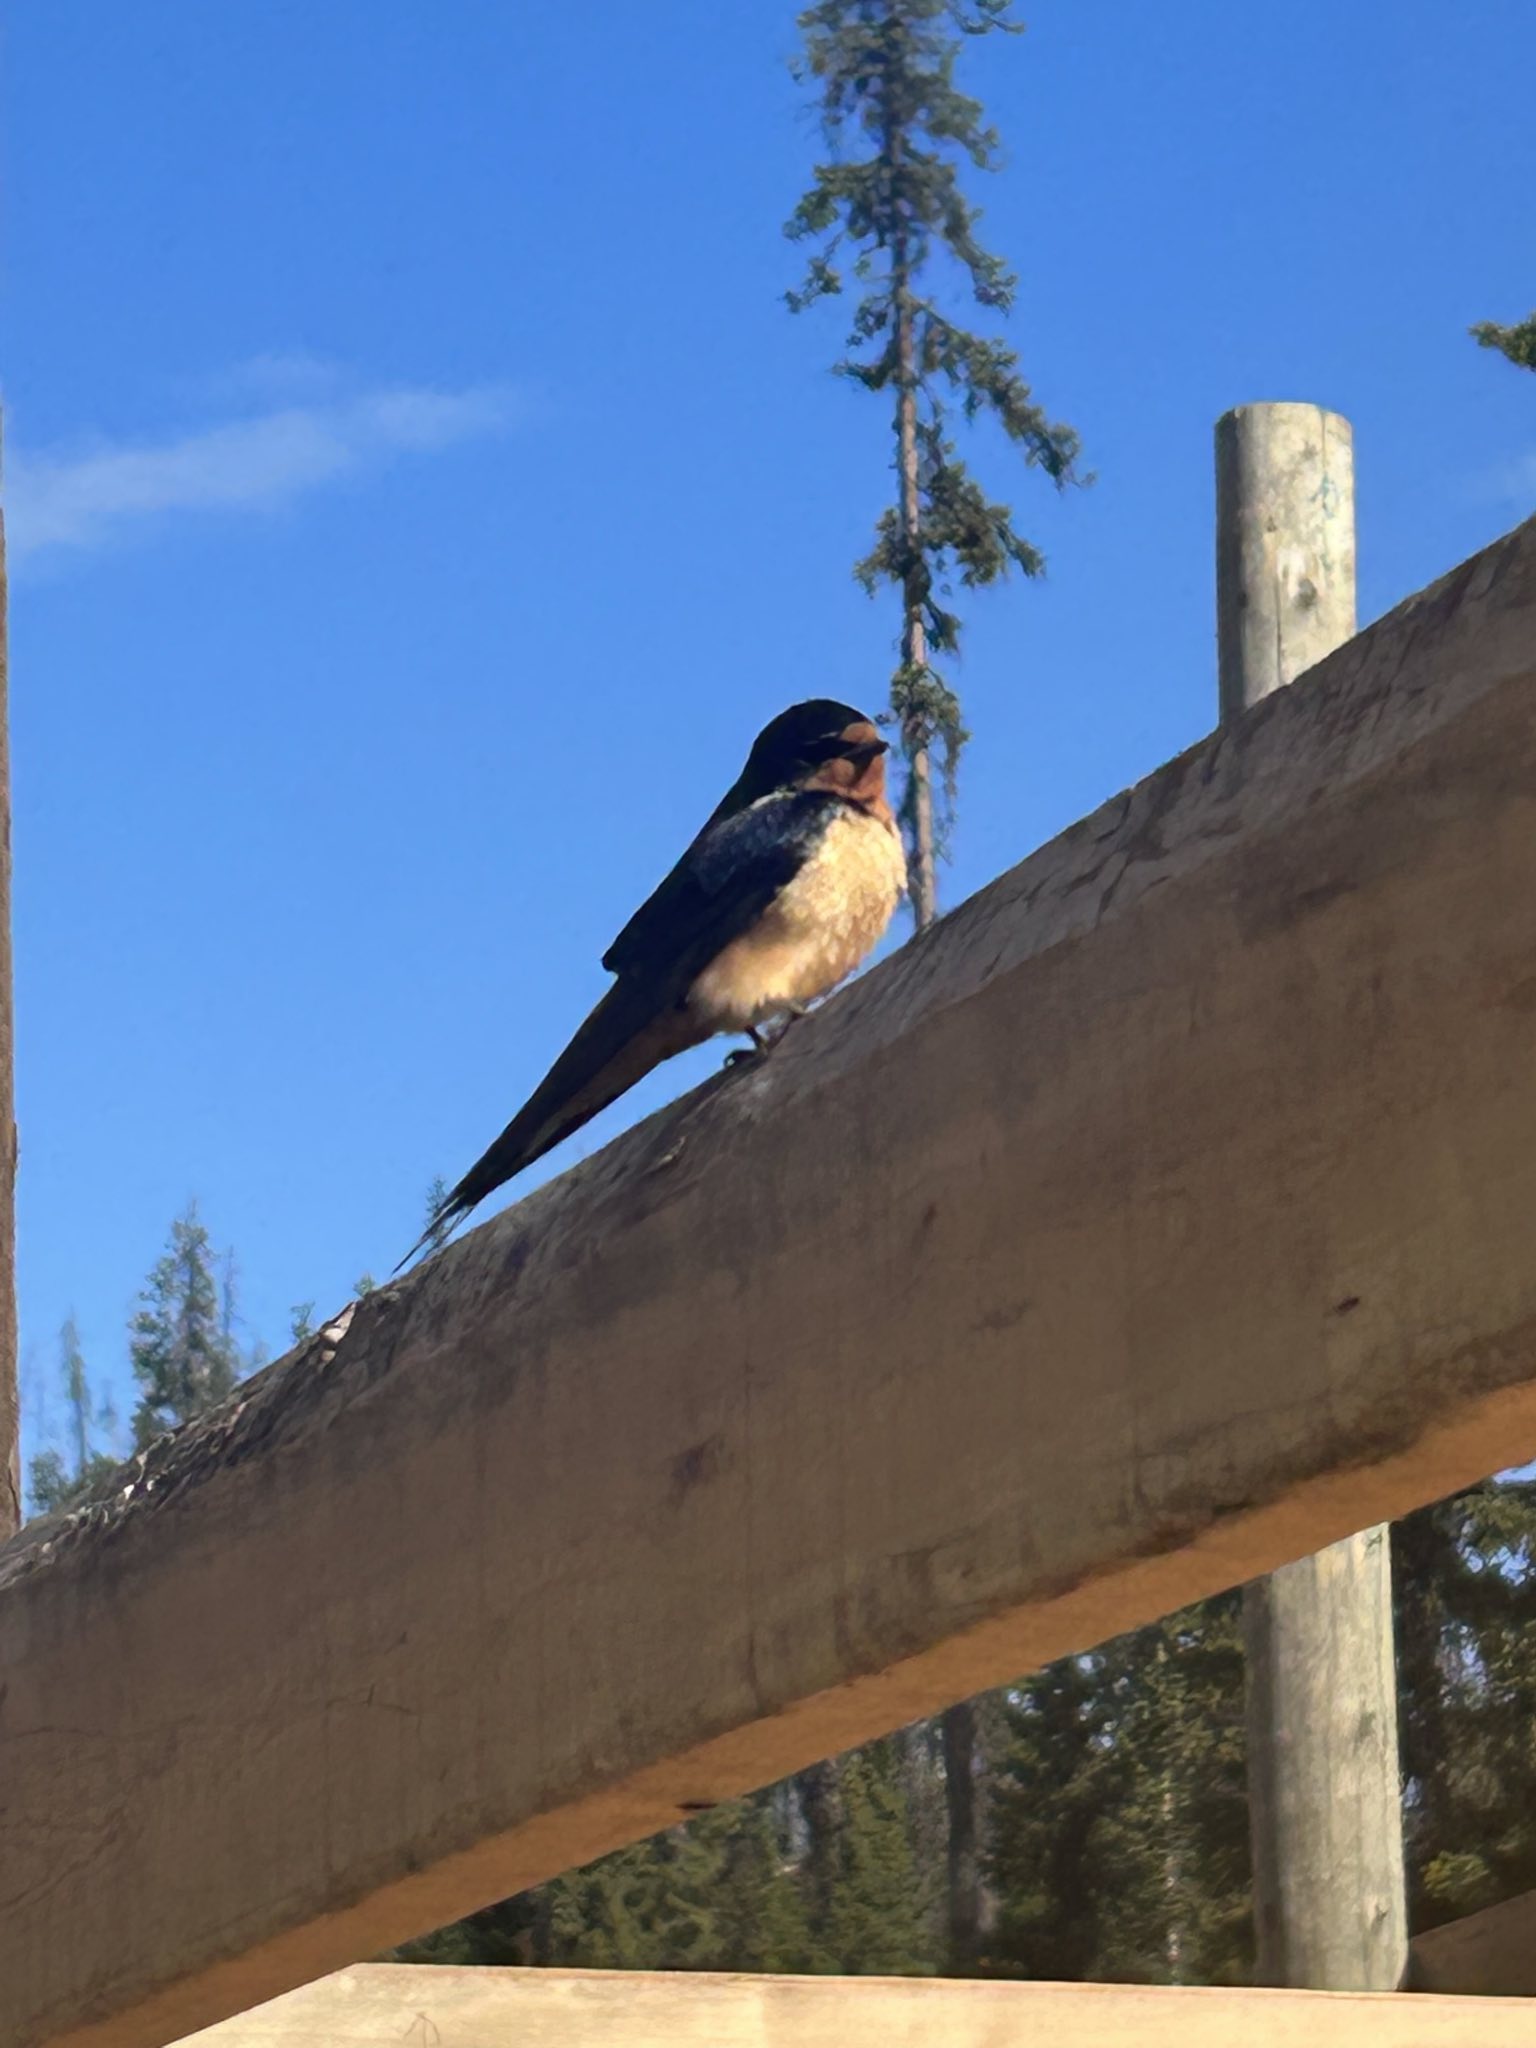 A bird sits on a construction beam in the morning sun